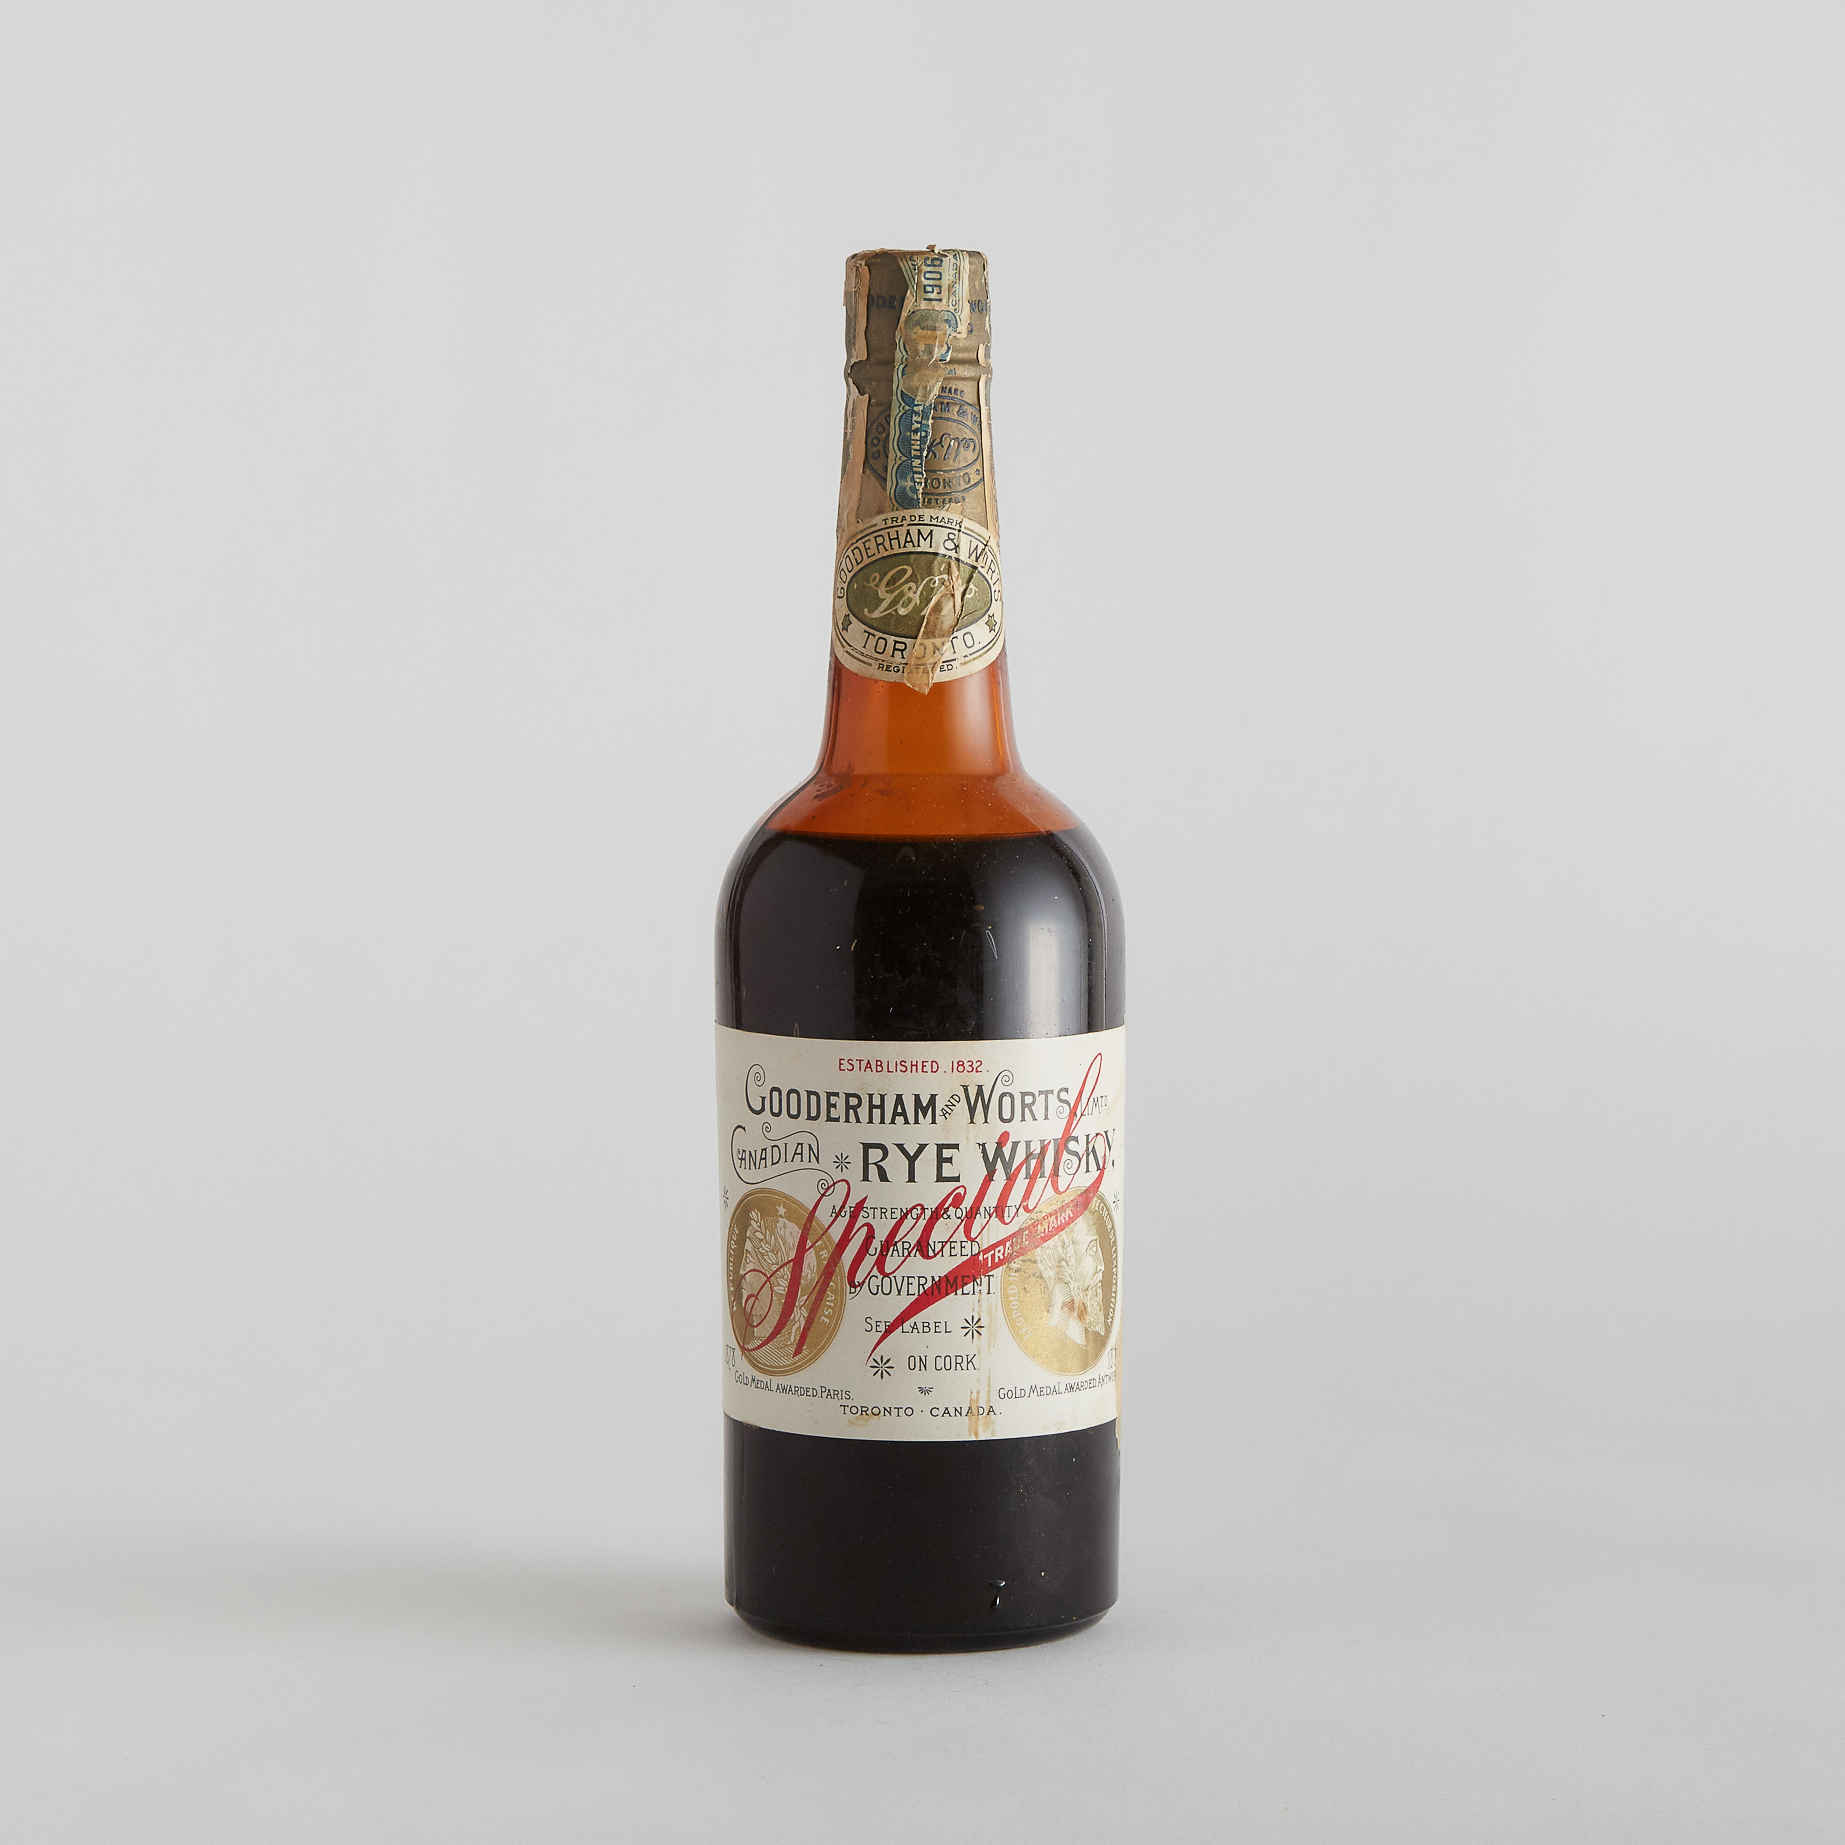 GOODERHAM AND WORTS CANADIAN RYE WHISKY NAS (ONE)